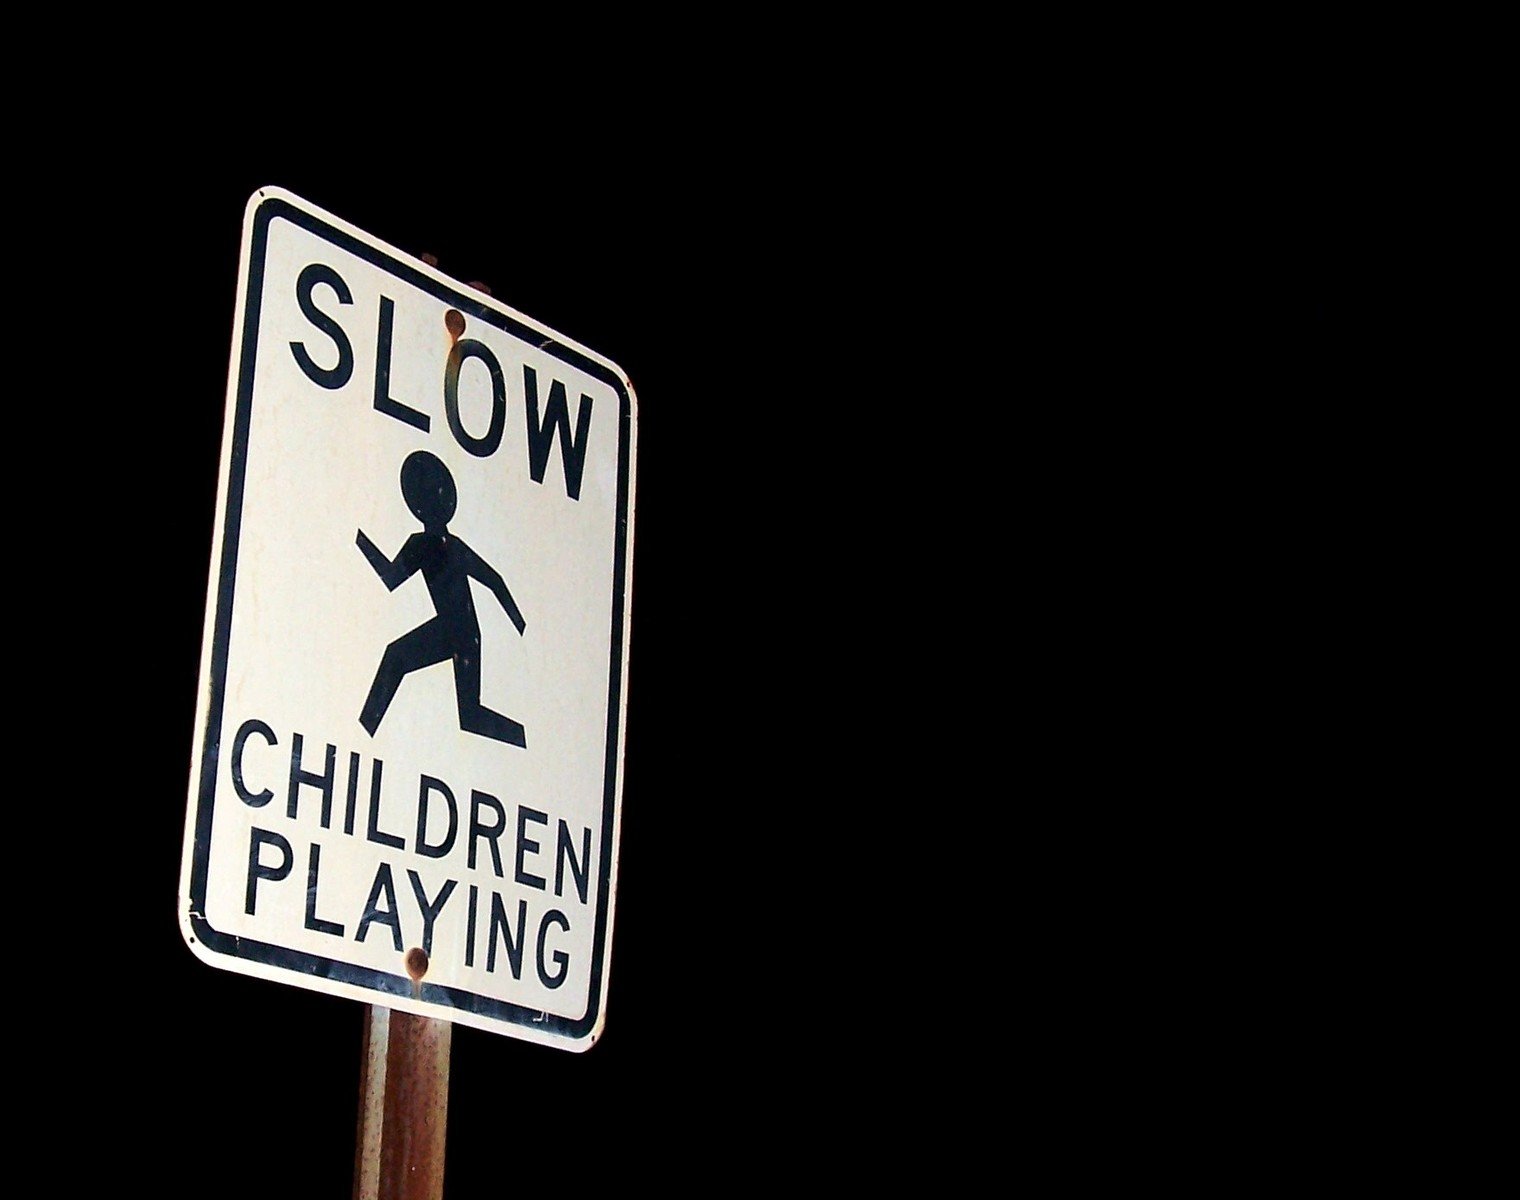 a sign that reads slow and children playing